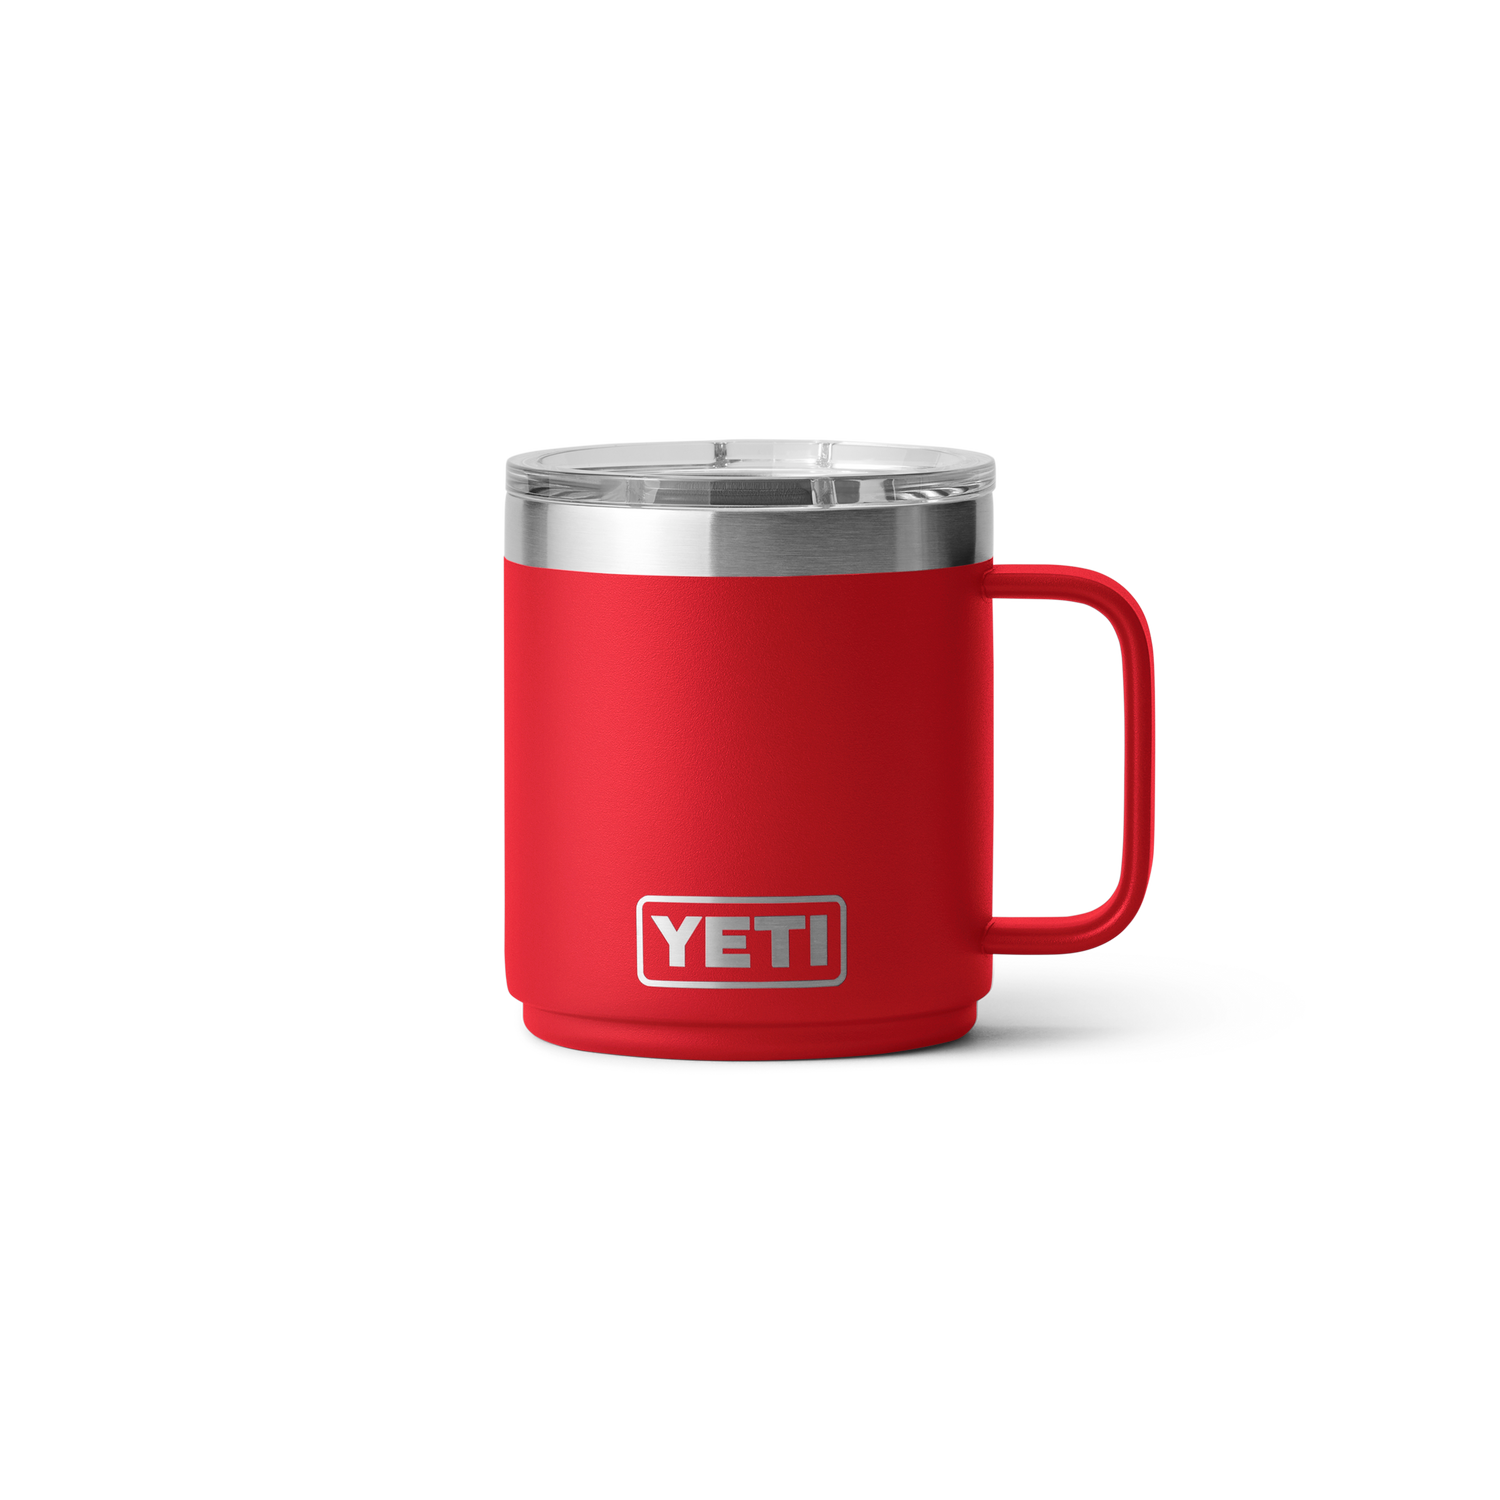 Yeti Alpine Collection - Inspired By The Beacons Of The Alps